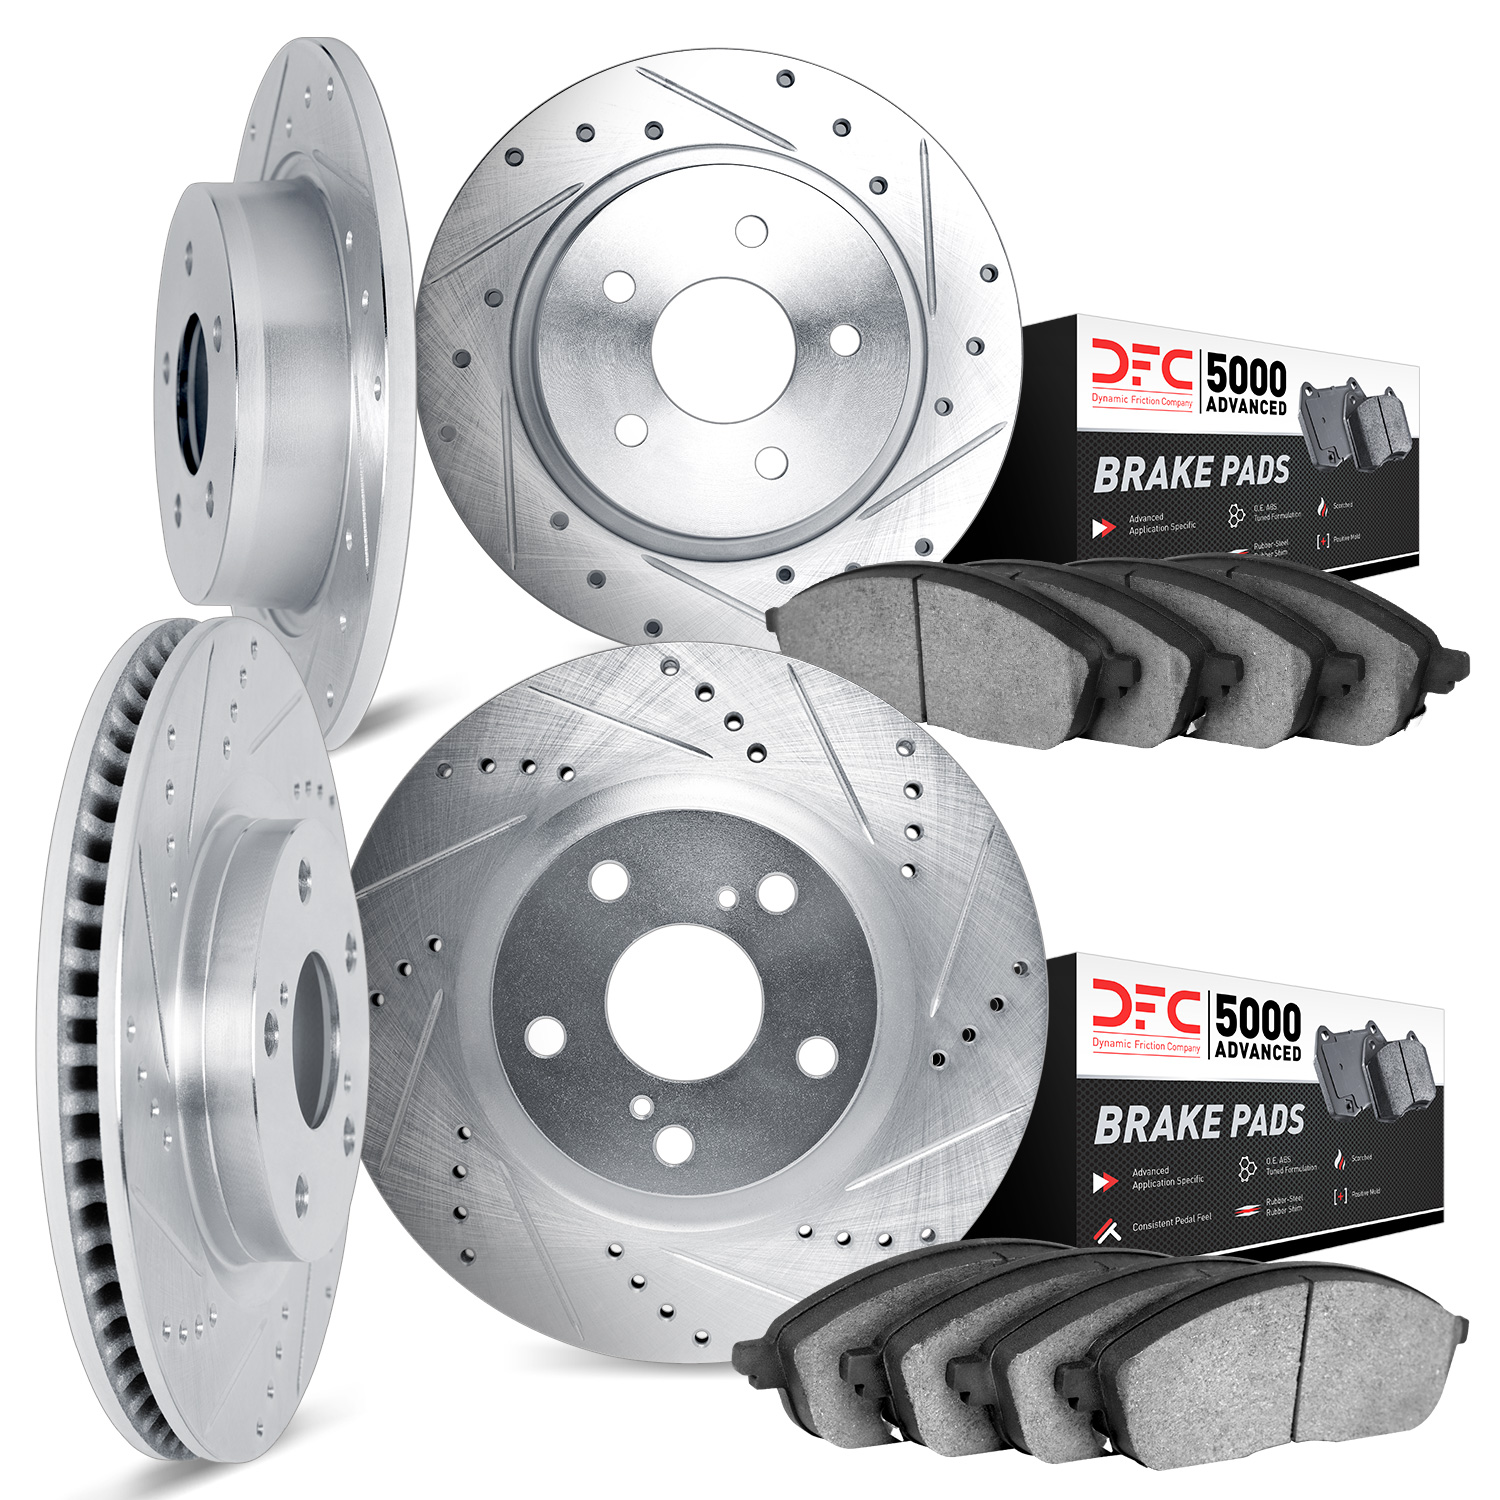 7504-76134 Drilled/Slotted Brake Rotors w/5000 Advanced Brake Pads Kit [Silver], 1995-1997 Lexus/Toyota/Scion, Position: Front a